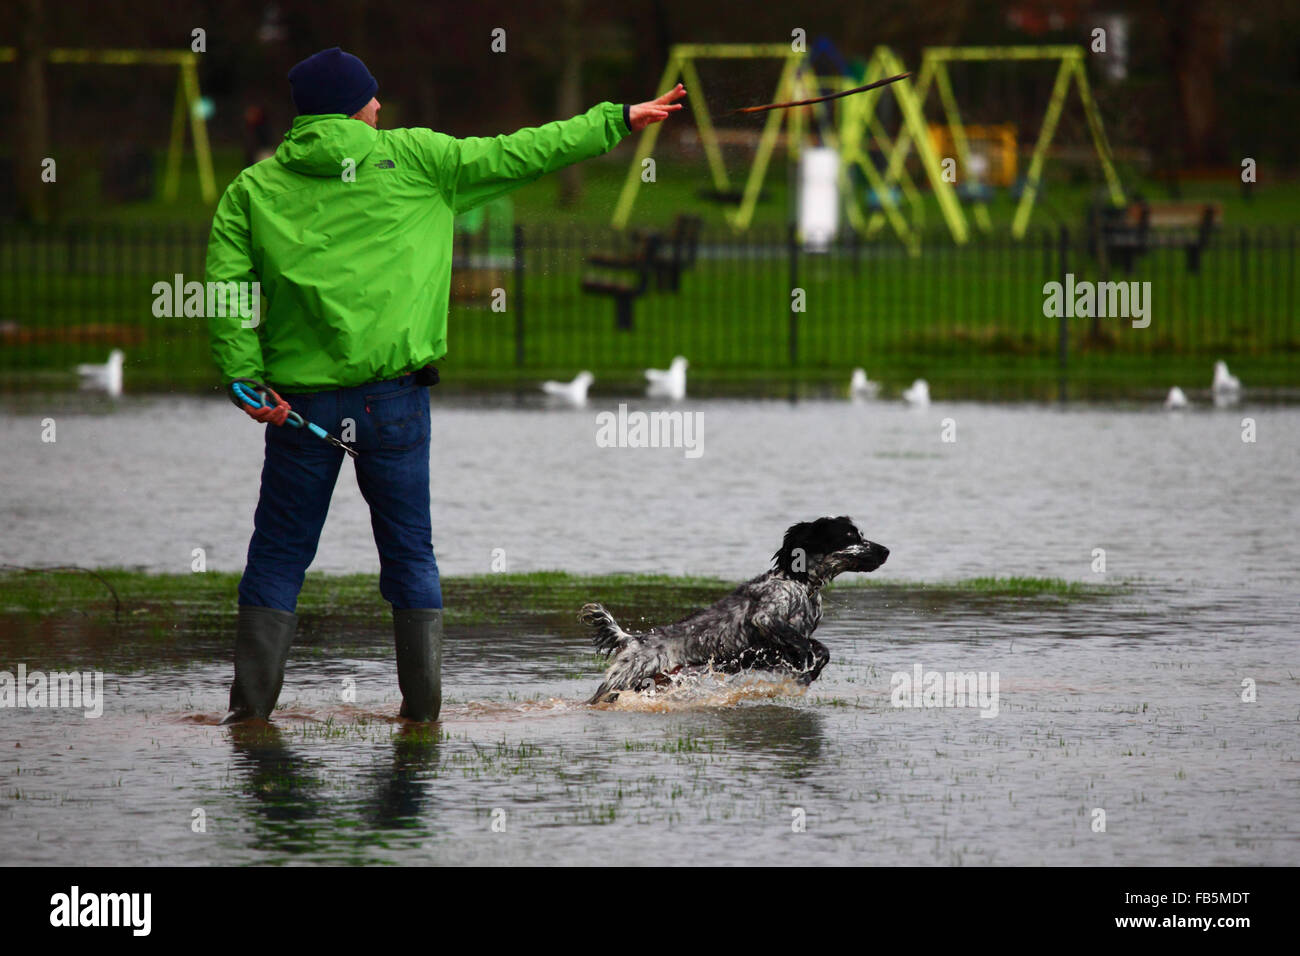 Tonbridge, Kent, England 10th January 2016: A man throws a stick for his dog to chase in floodwater on a playing field in Tonbridge. Recent heavy rain has left the playing fields partially flooded and the ground saturated, and the River Medway (which flows through the town) is currently bank full. Credit:  James Brunker / Alamy Live News Stock Photo